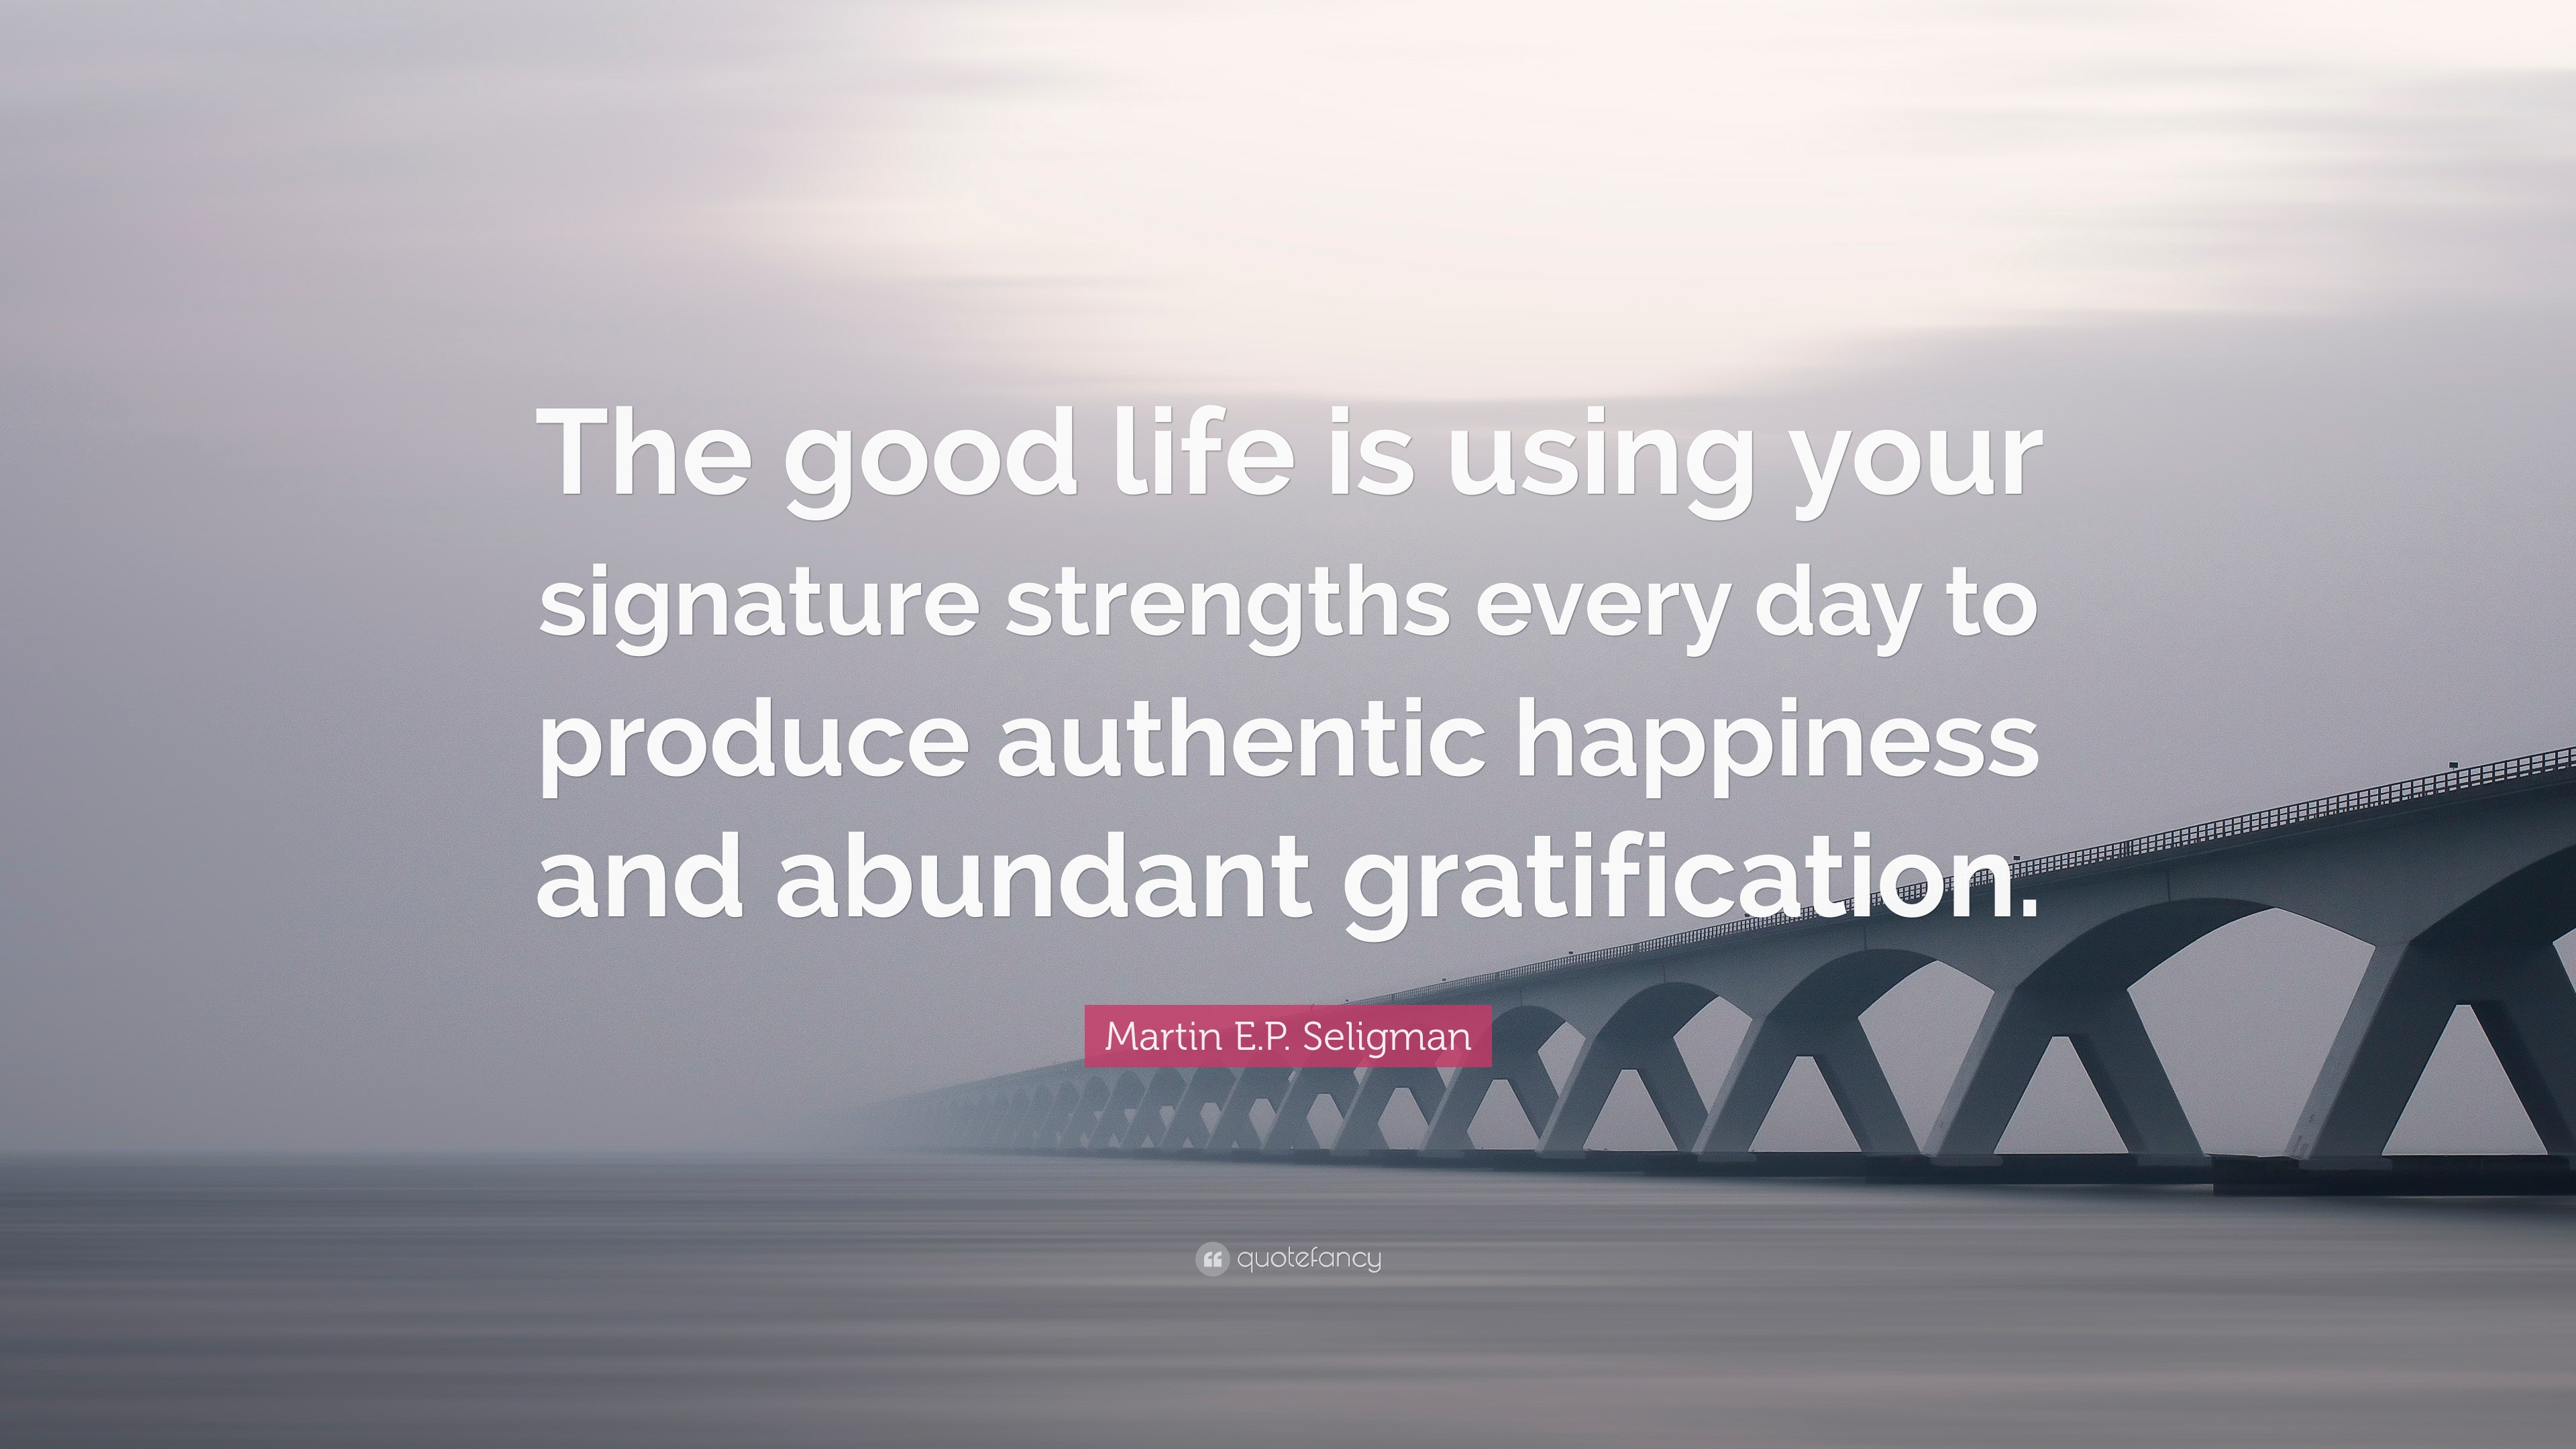 life is good picture quotes the good life quote quote about good food good pany u003d the